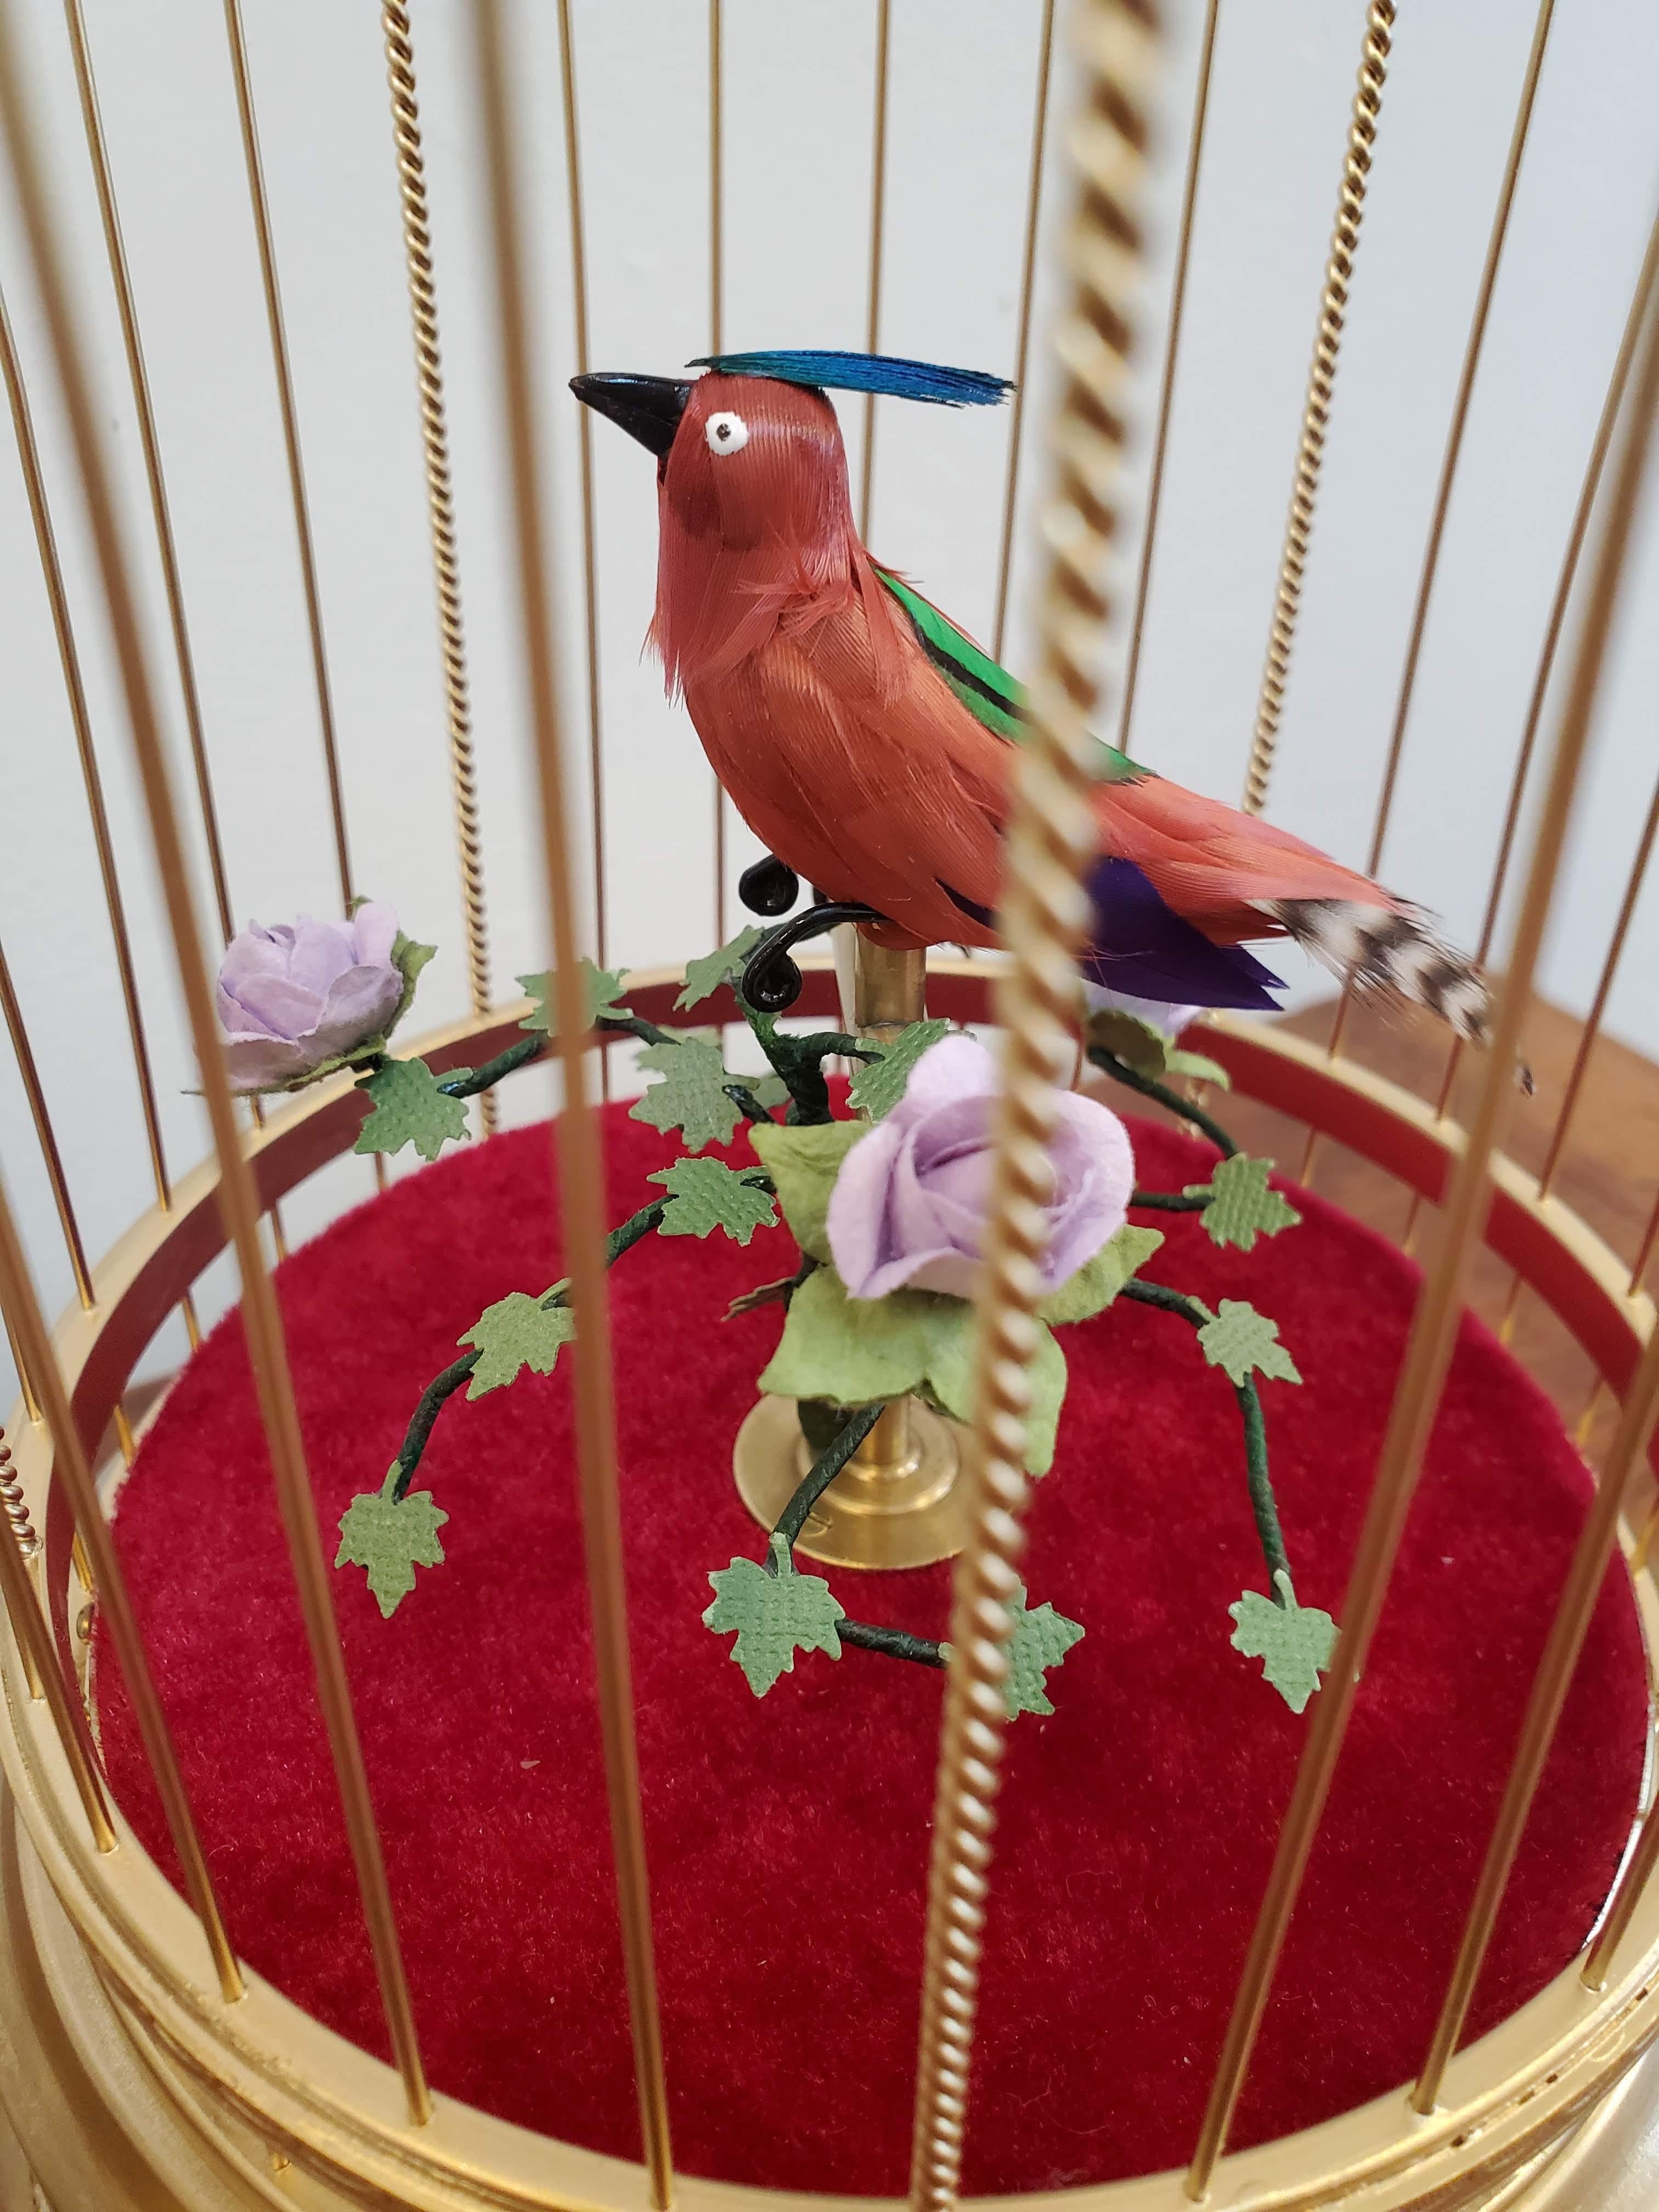 This early 20th century musical bird automaton is an entertaining wonder of mechanics. Automated singing bird with a strong voice and flamboyant plumage amidst foliage in a gilded brass cage. The whole family will be fascinated by this lovely piece.